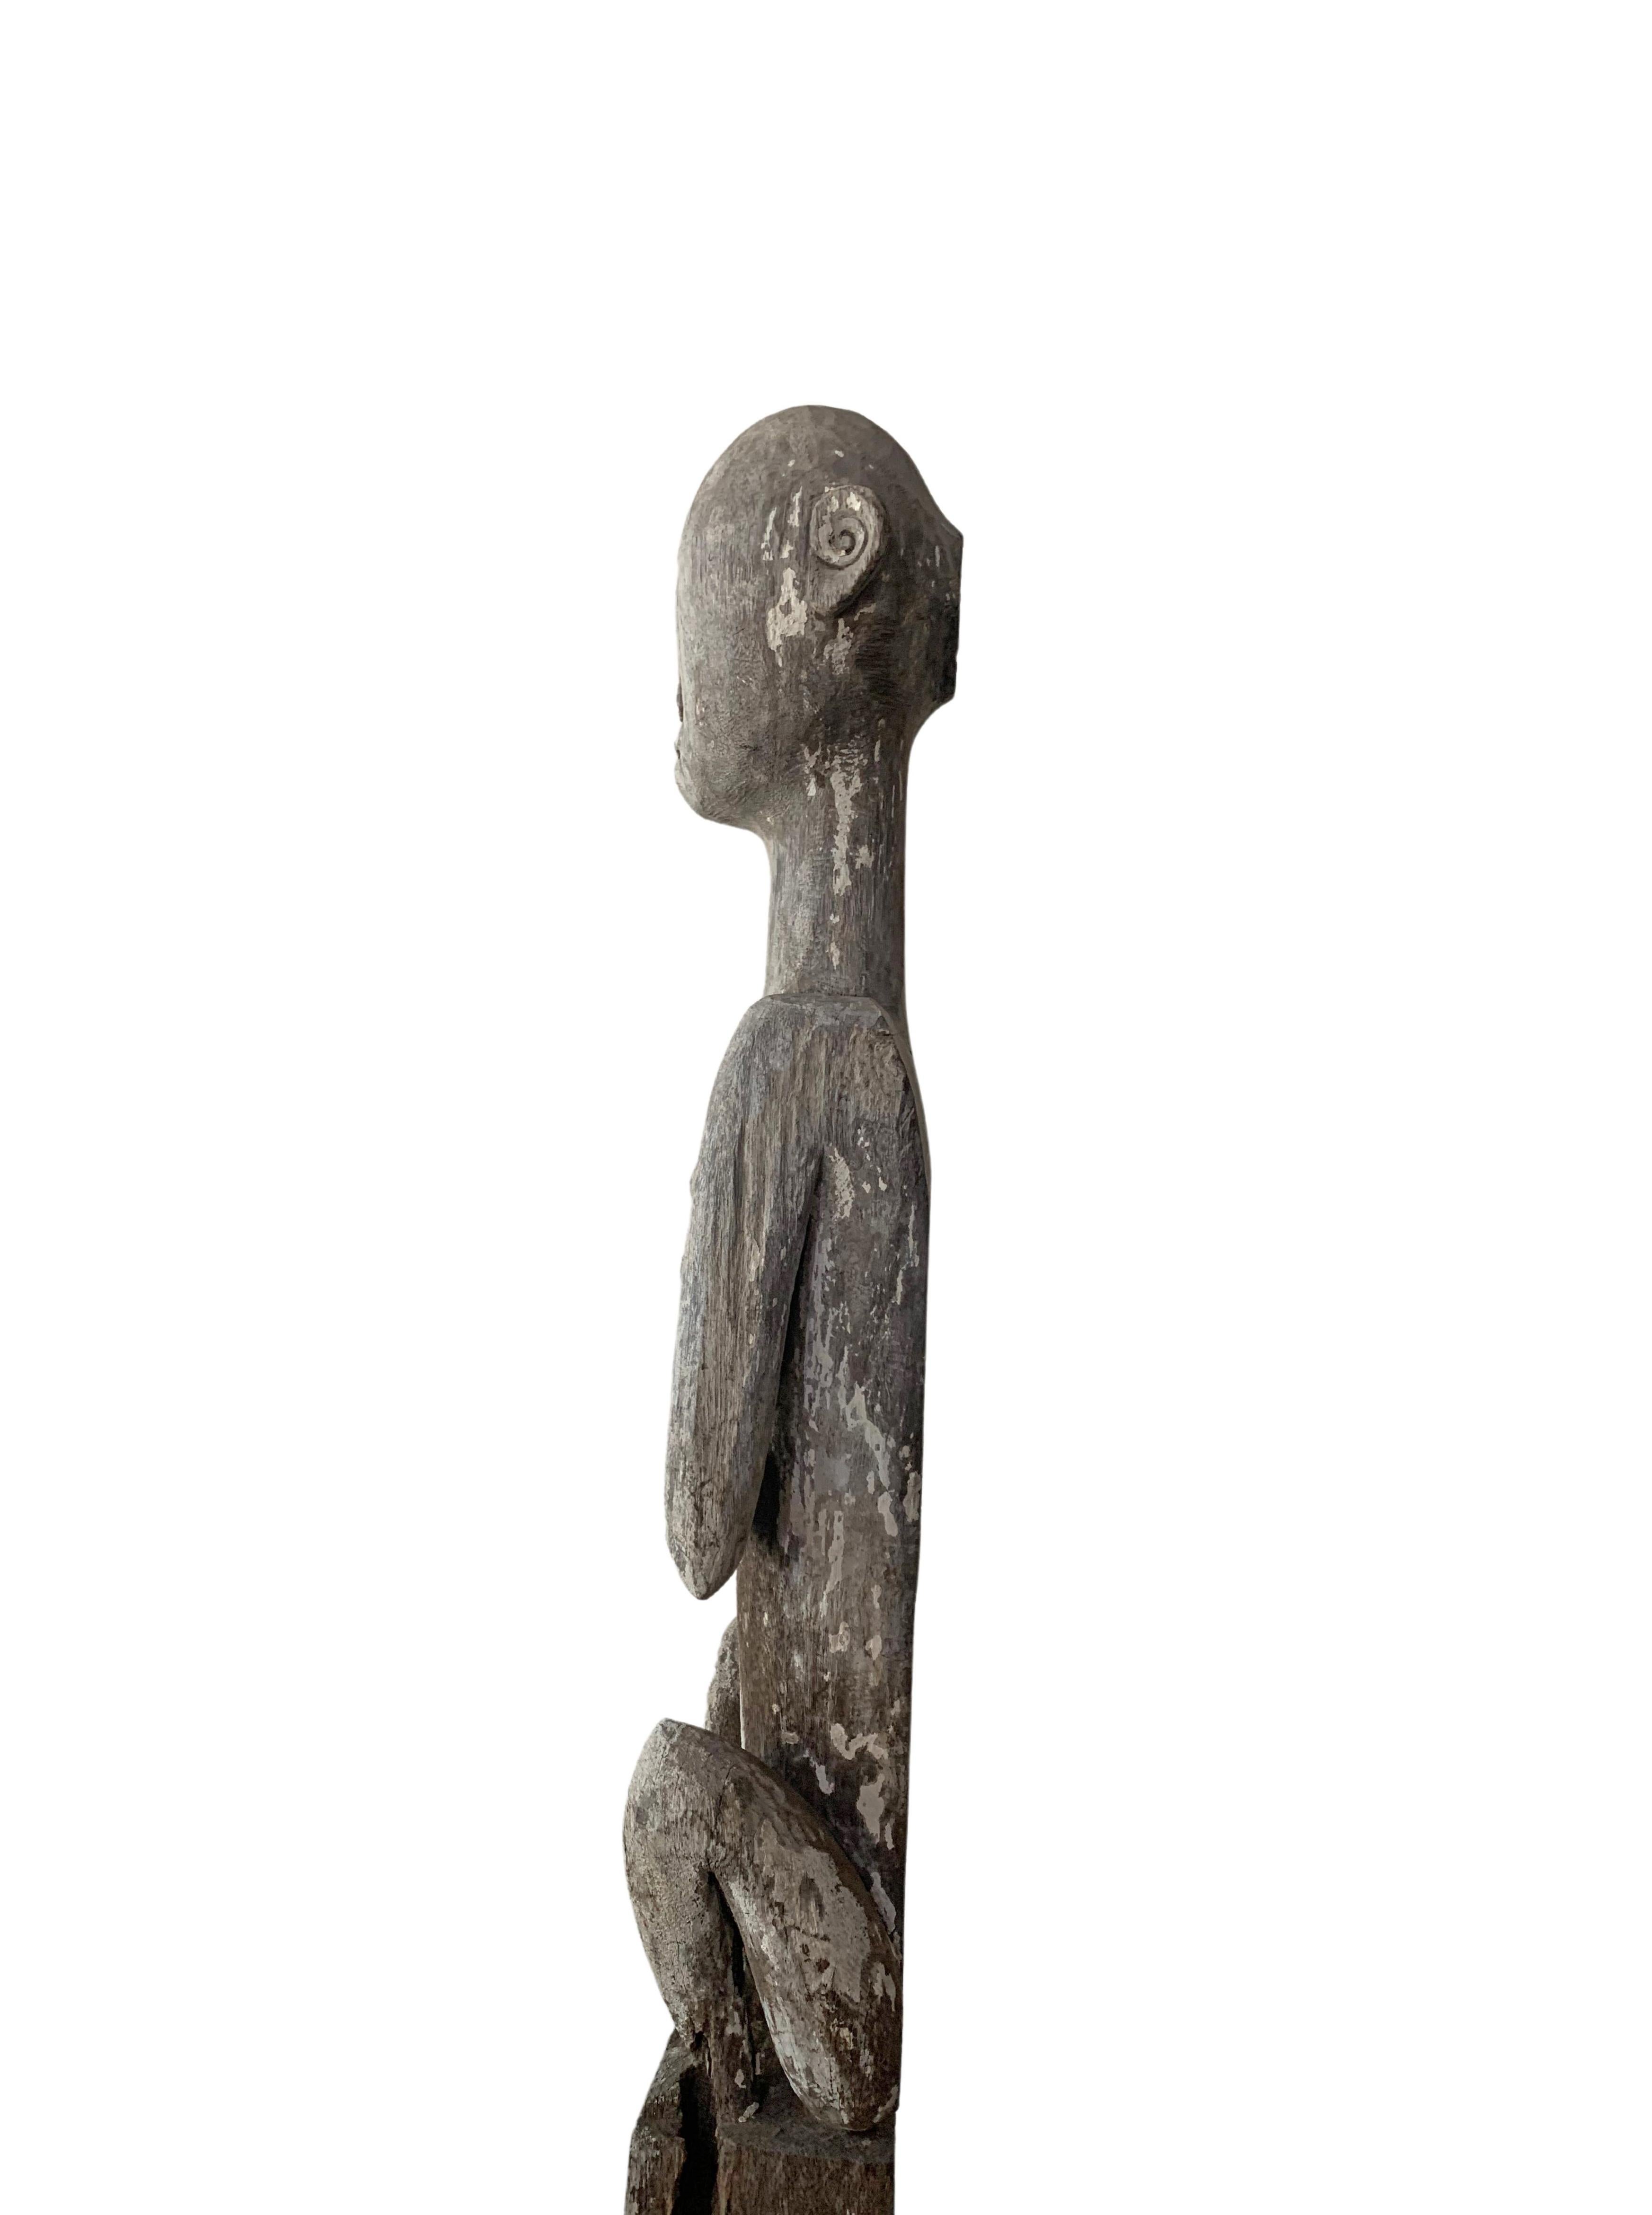 Hand-Carved Wooden Tribal Sculpture / Carving of Ancestral Figure, Sumba Island, Indonesia